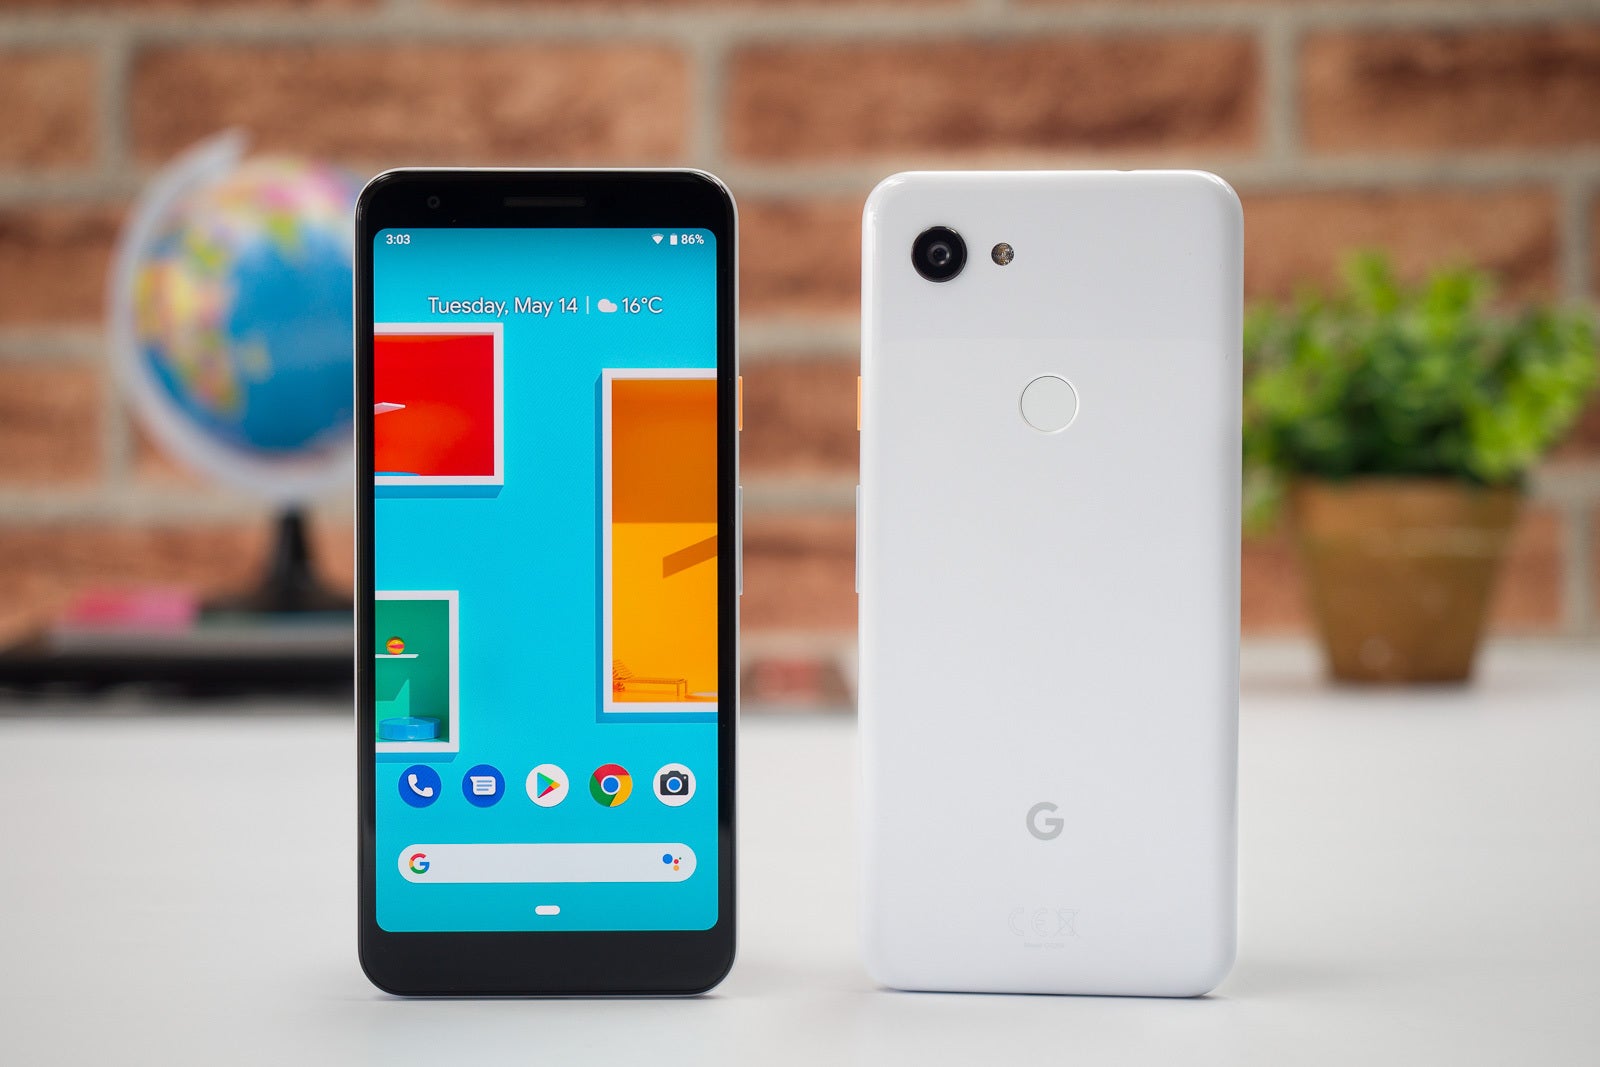 The Google Pixel 3a was likely the key growth driver - Despite the Pixel 4's reception, Google Pixel sales were surprisingly strong in 2019